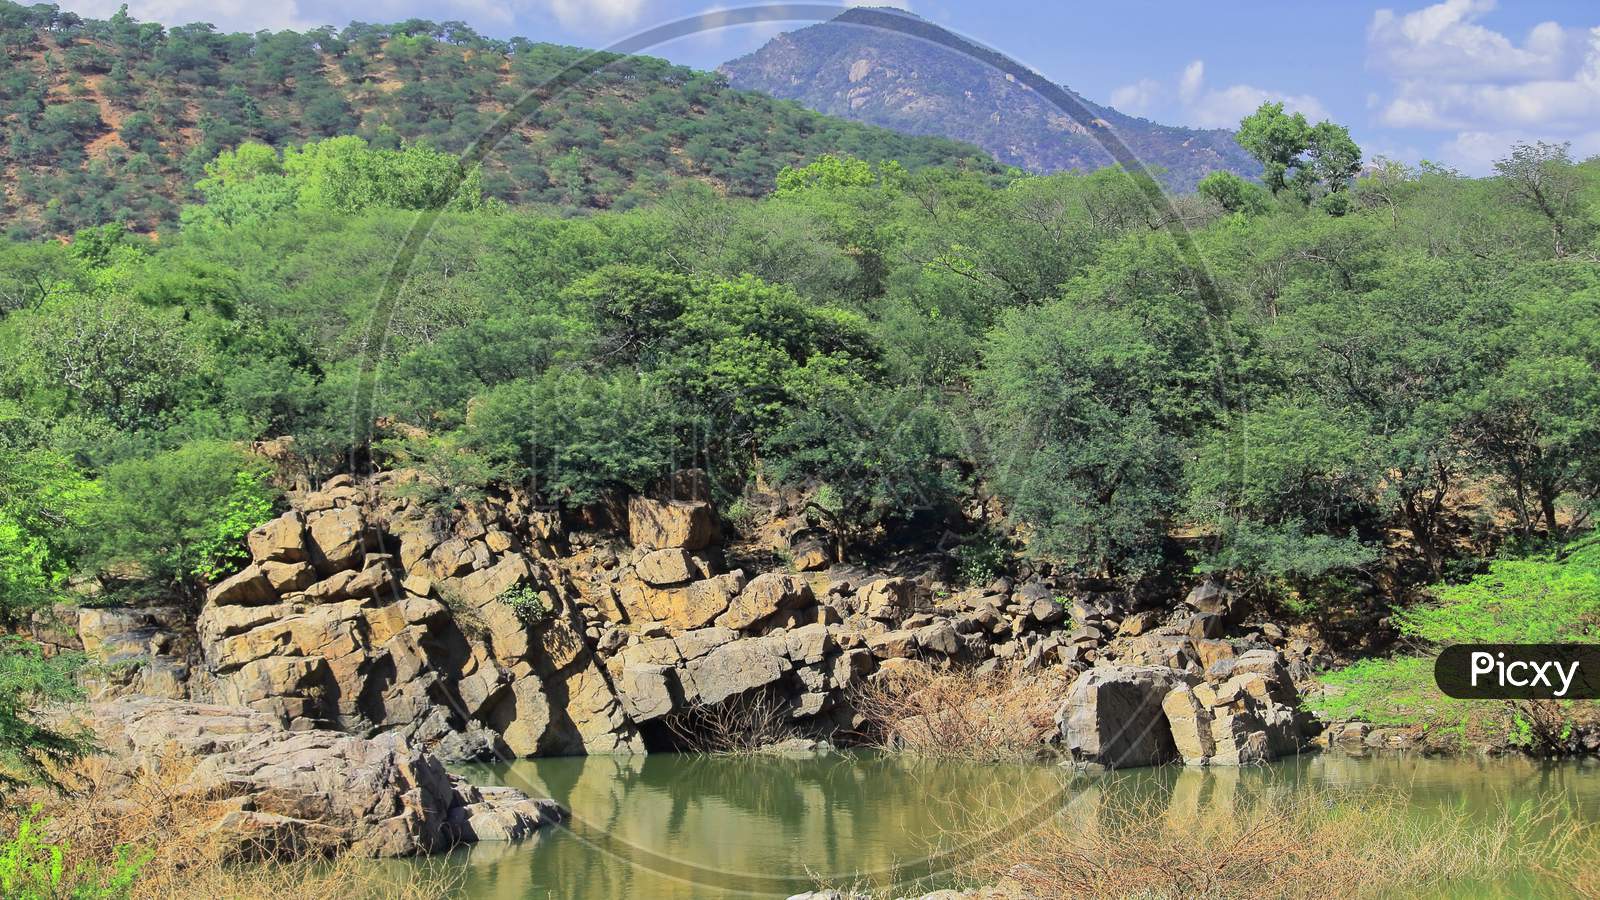 rocky landscape and chinnar river (a small tributary of kaveri river) at hogenakkal in tamilnadu, india